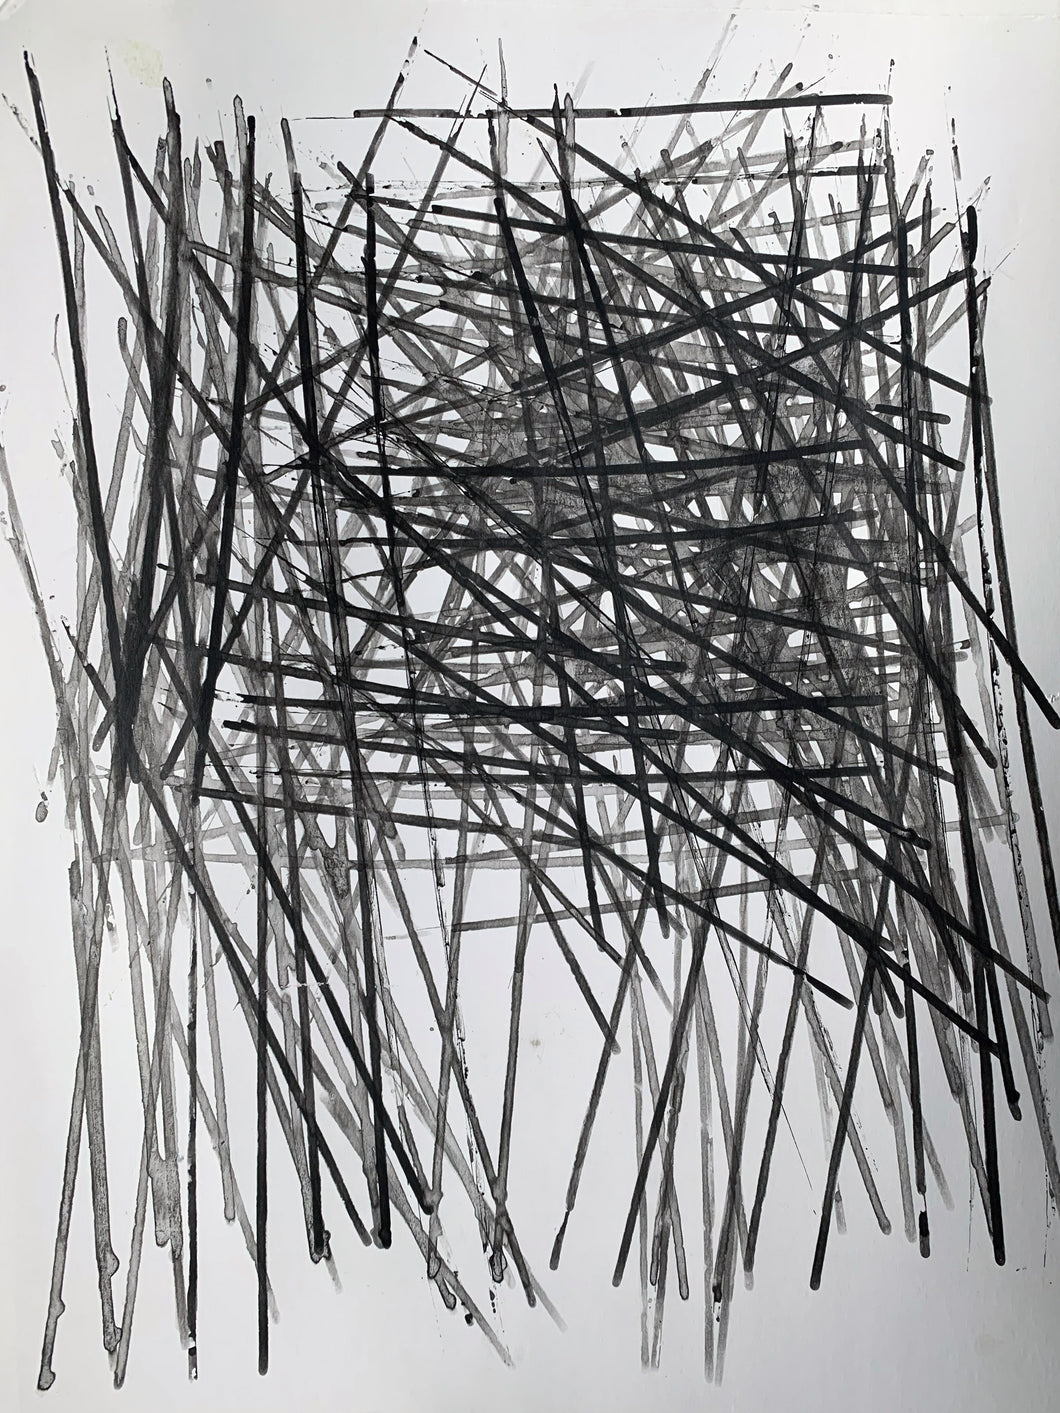 Abstract line painting in black and white by Artist Rachael Grad